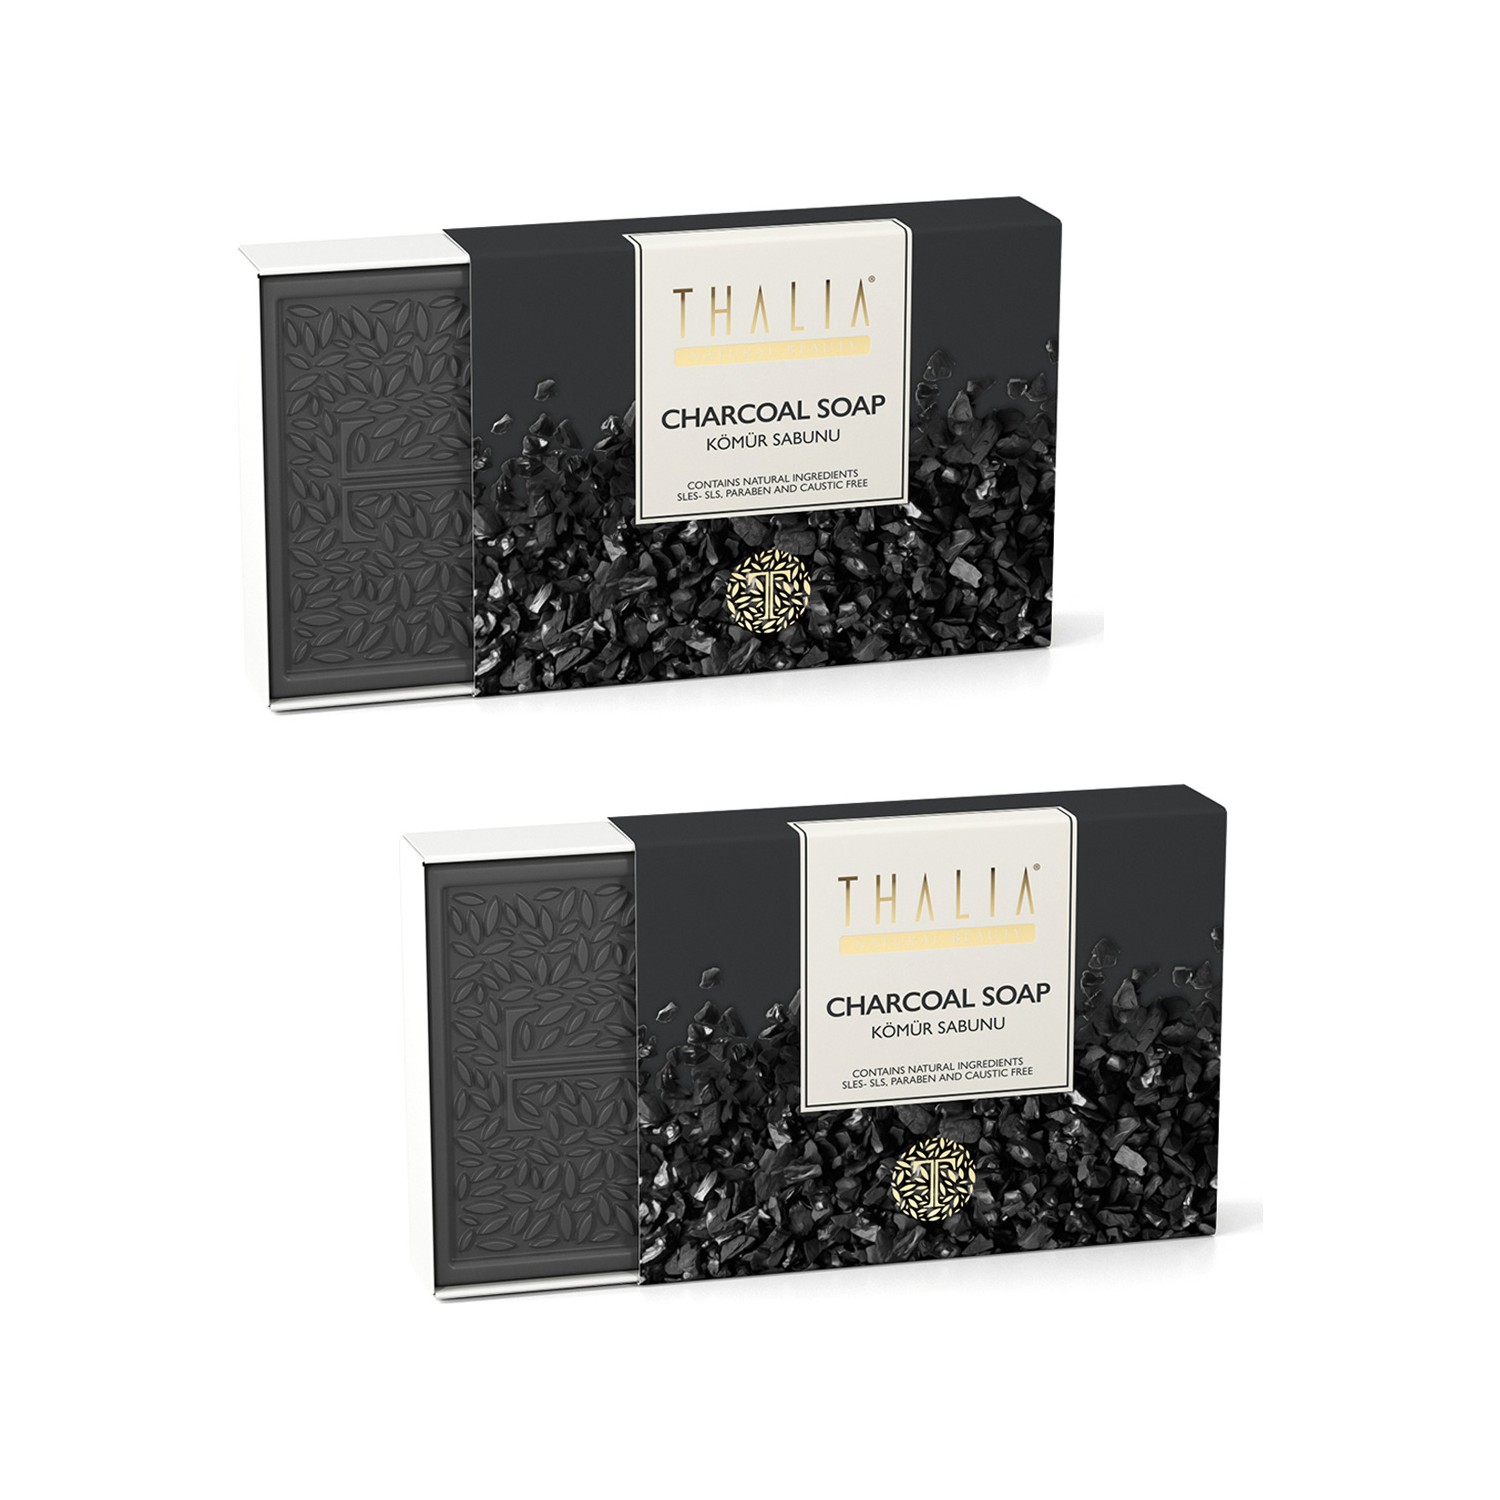 Мыло Thalia Natural Charcoal, 2 x 150 г bamboo charcoal handmade soap 100g natural charcoal soap sea salt in addition to mites oil control goat milk cleansing oil